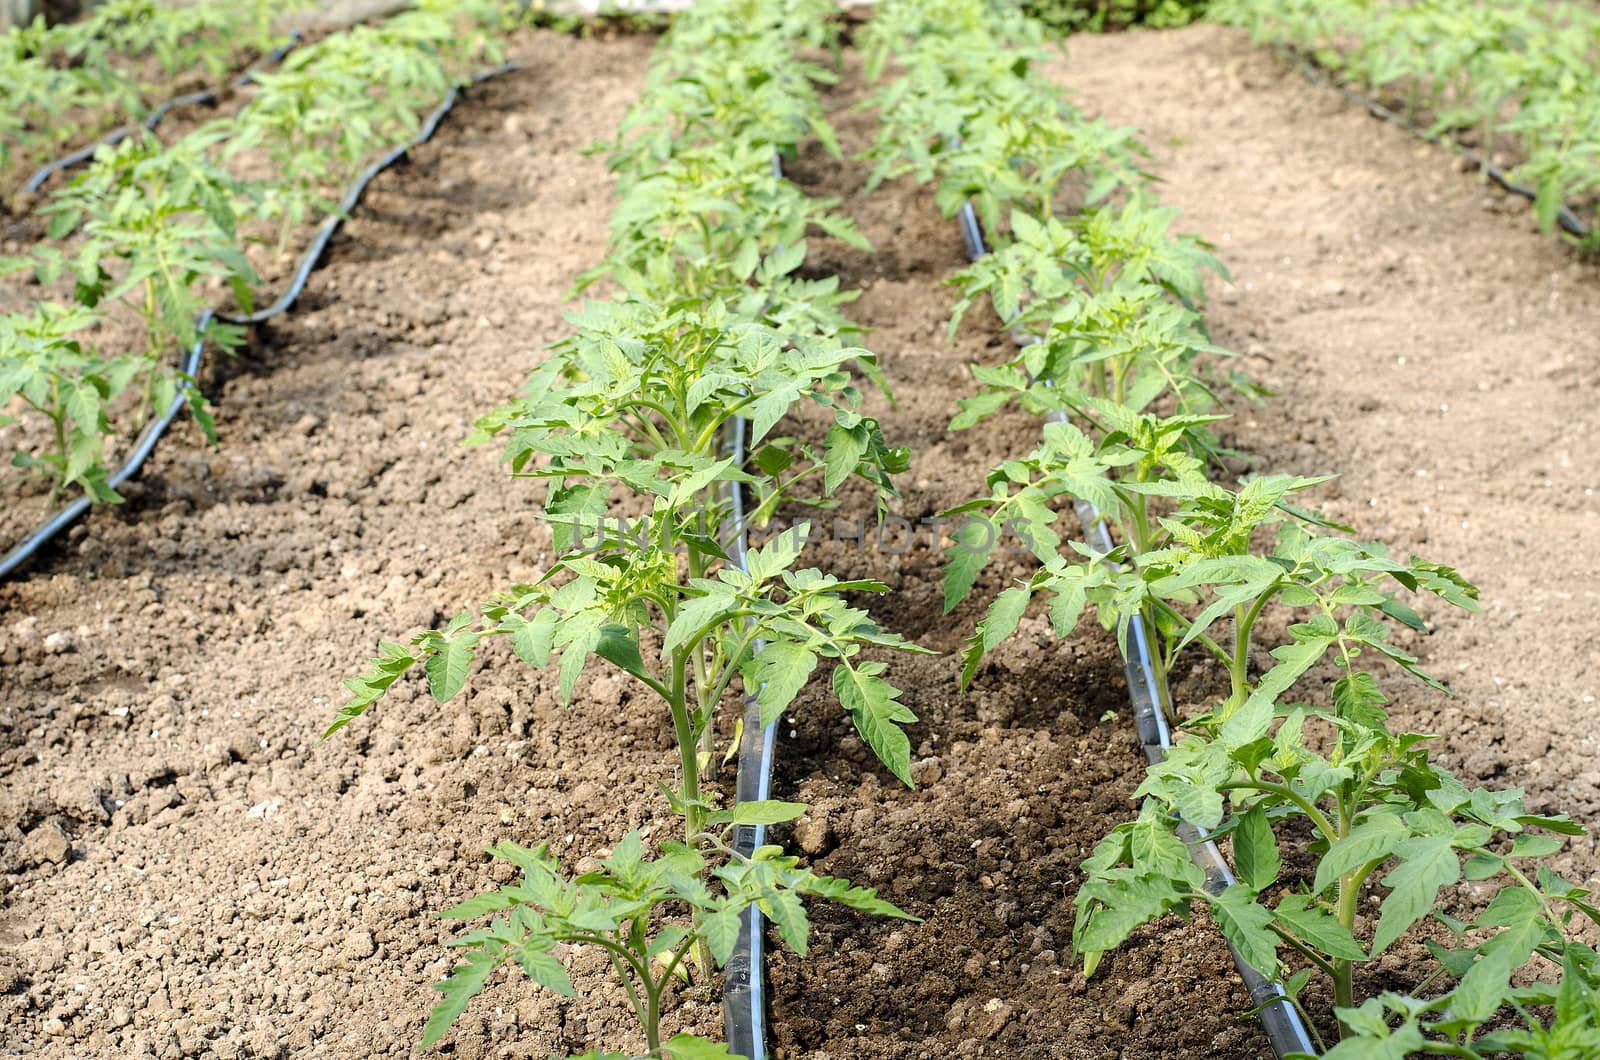 Newly planted tomato shoots in greenhouse